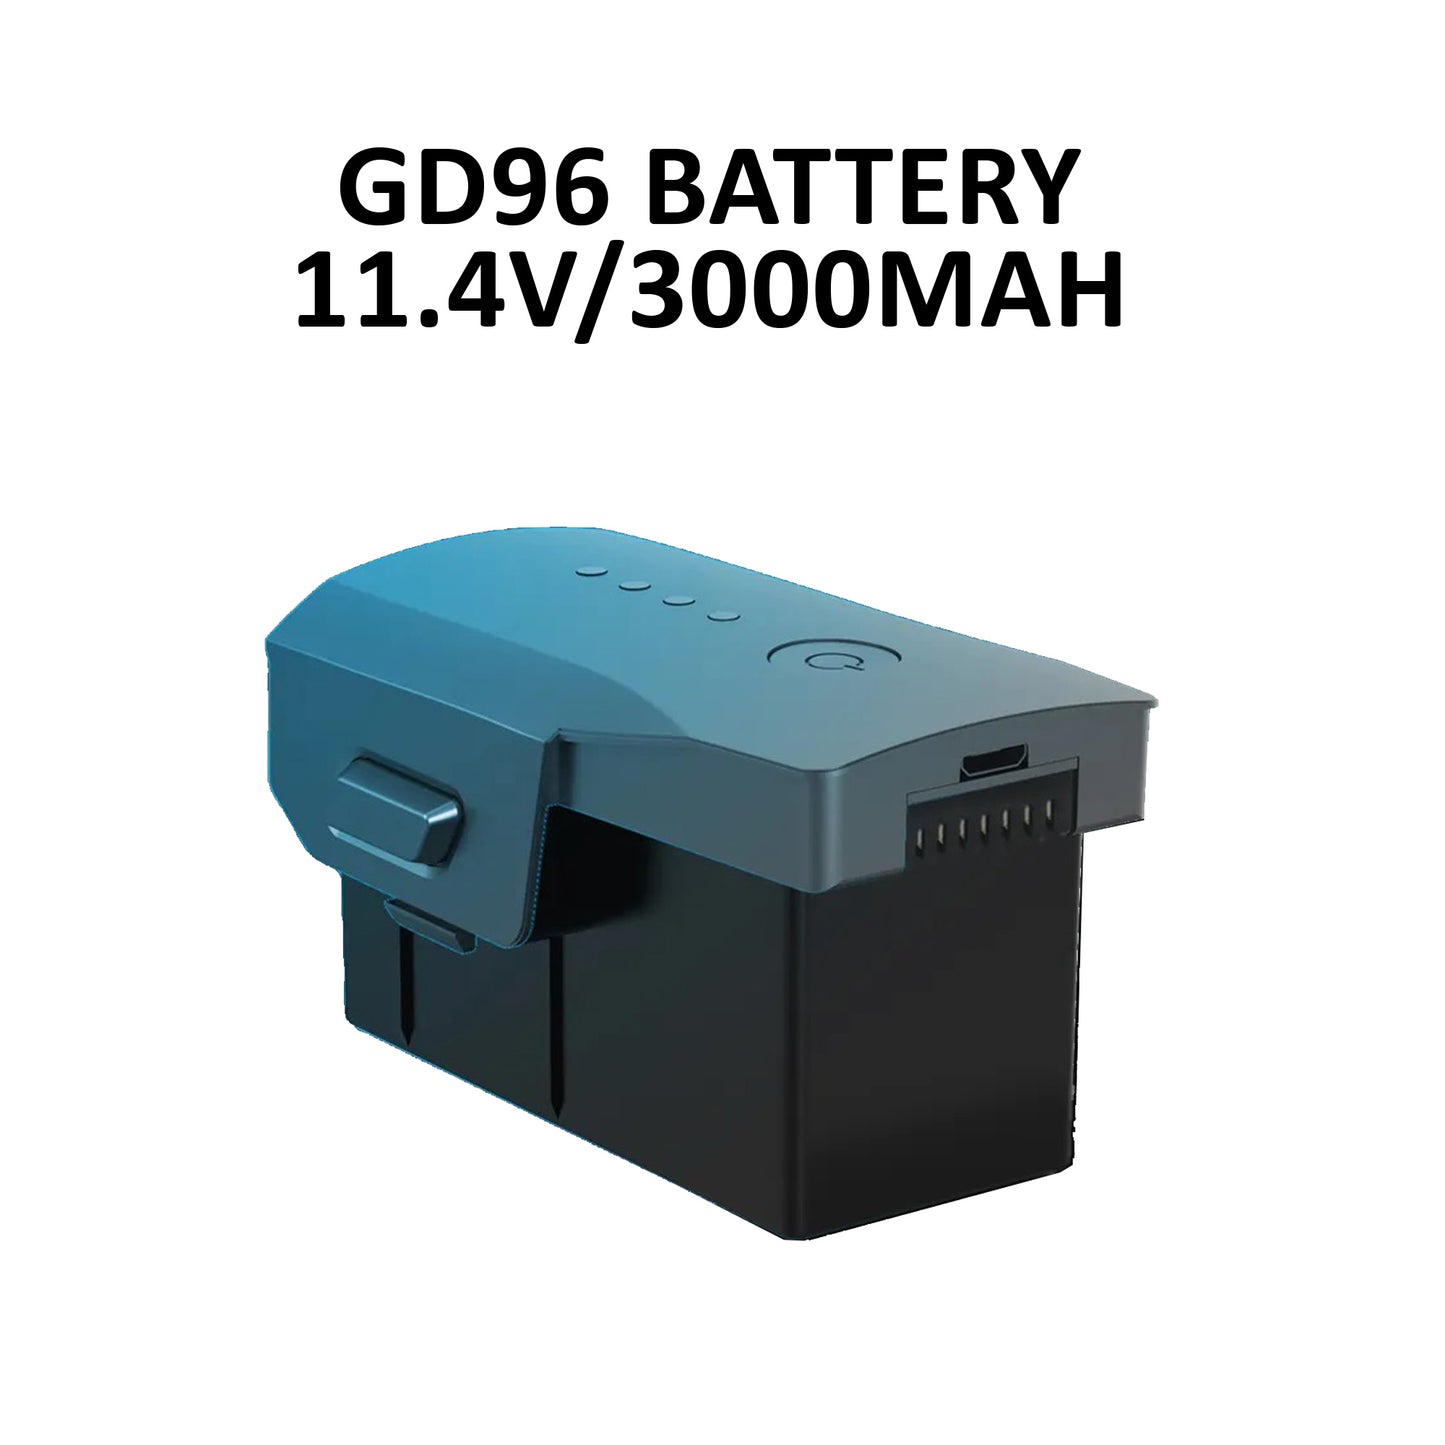 The Bigly Brothers GD96 Midnight Alpha Battery 11.4V 3000mAh - Pack of 1